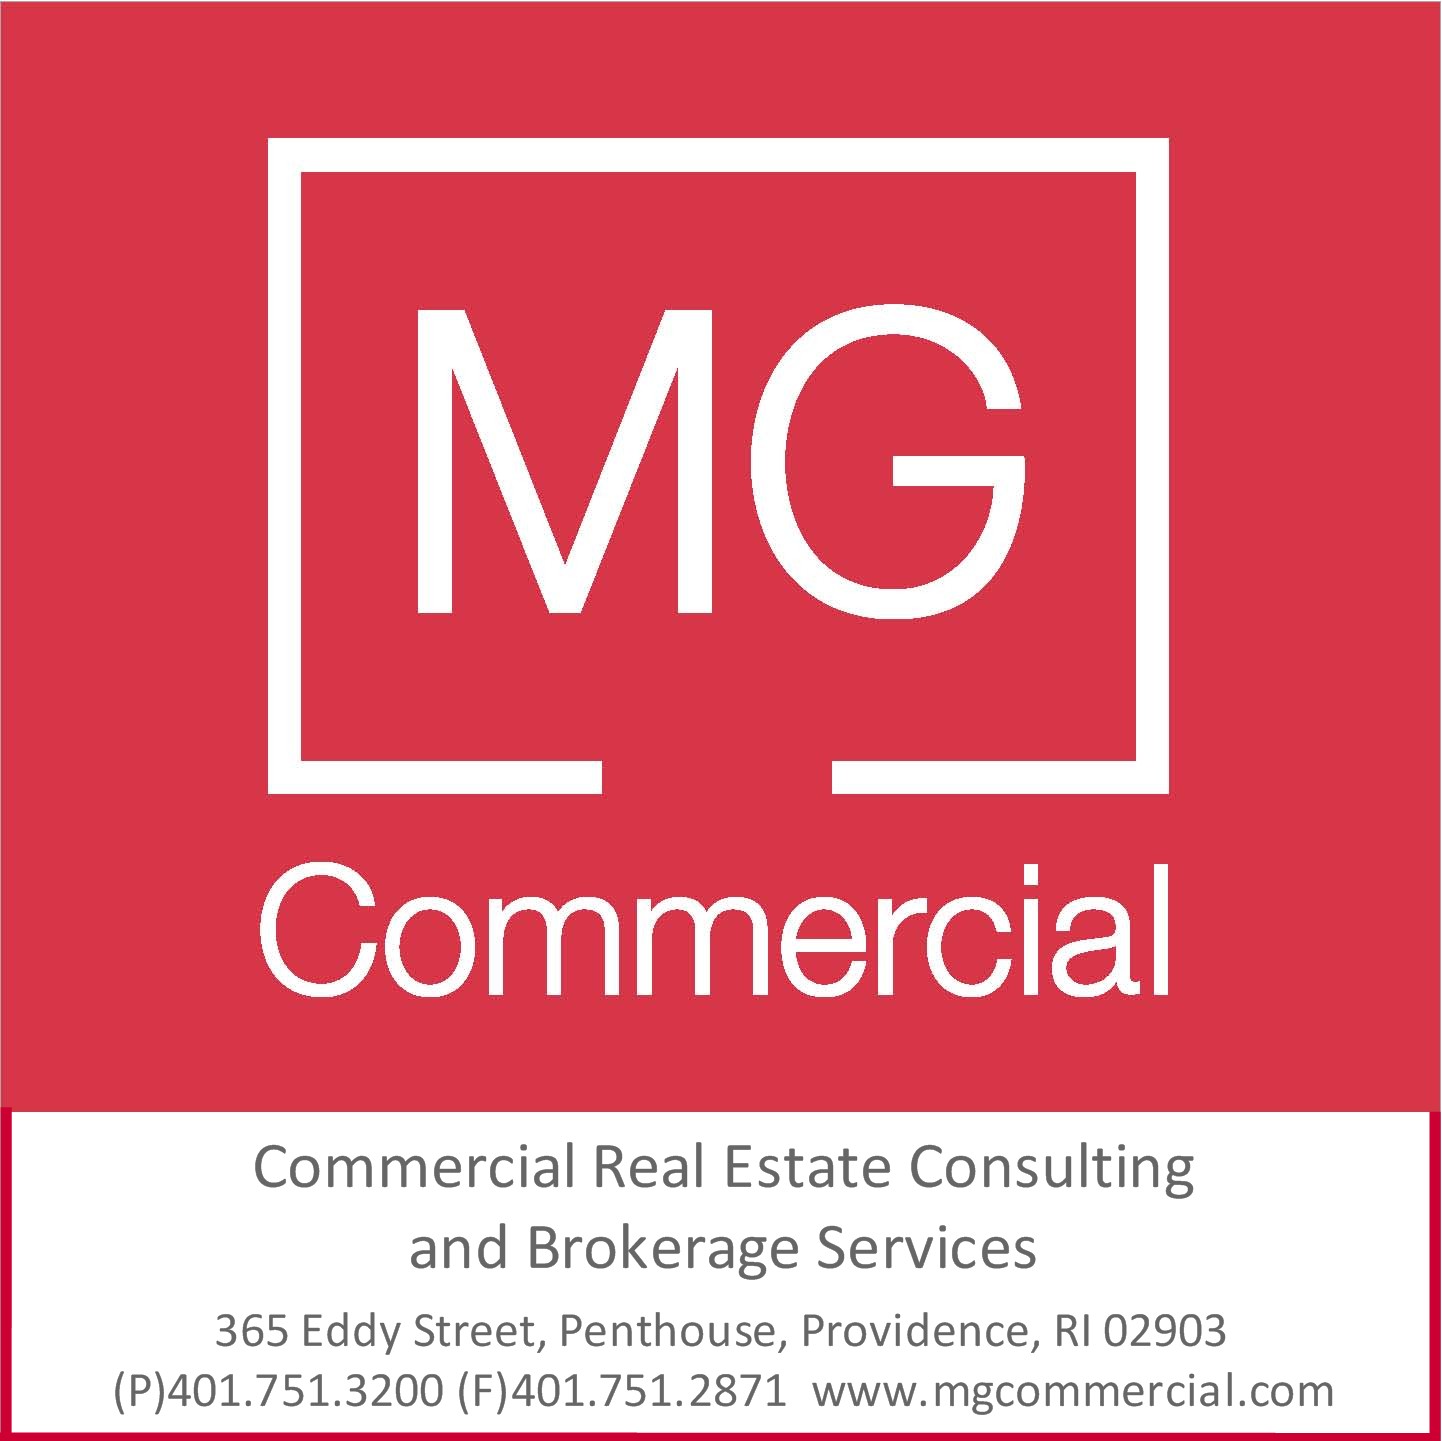 MG Commercial Real Estate